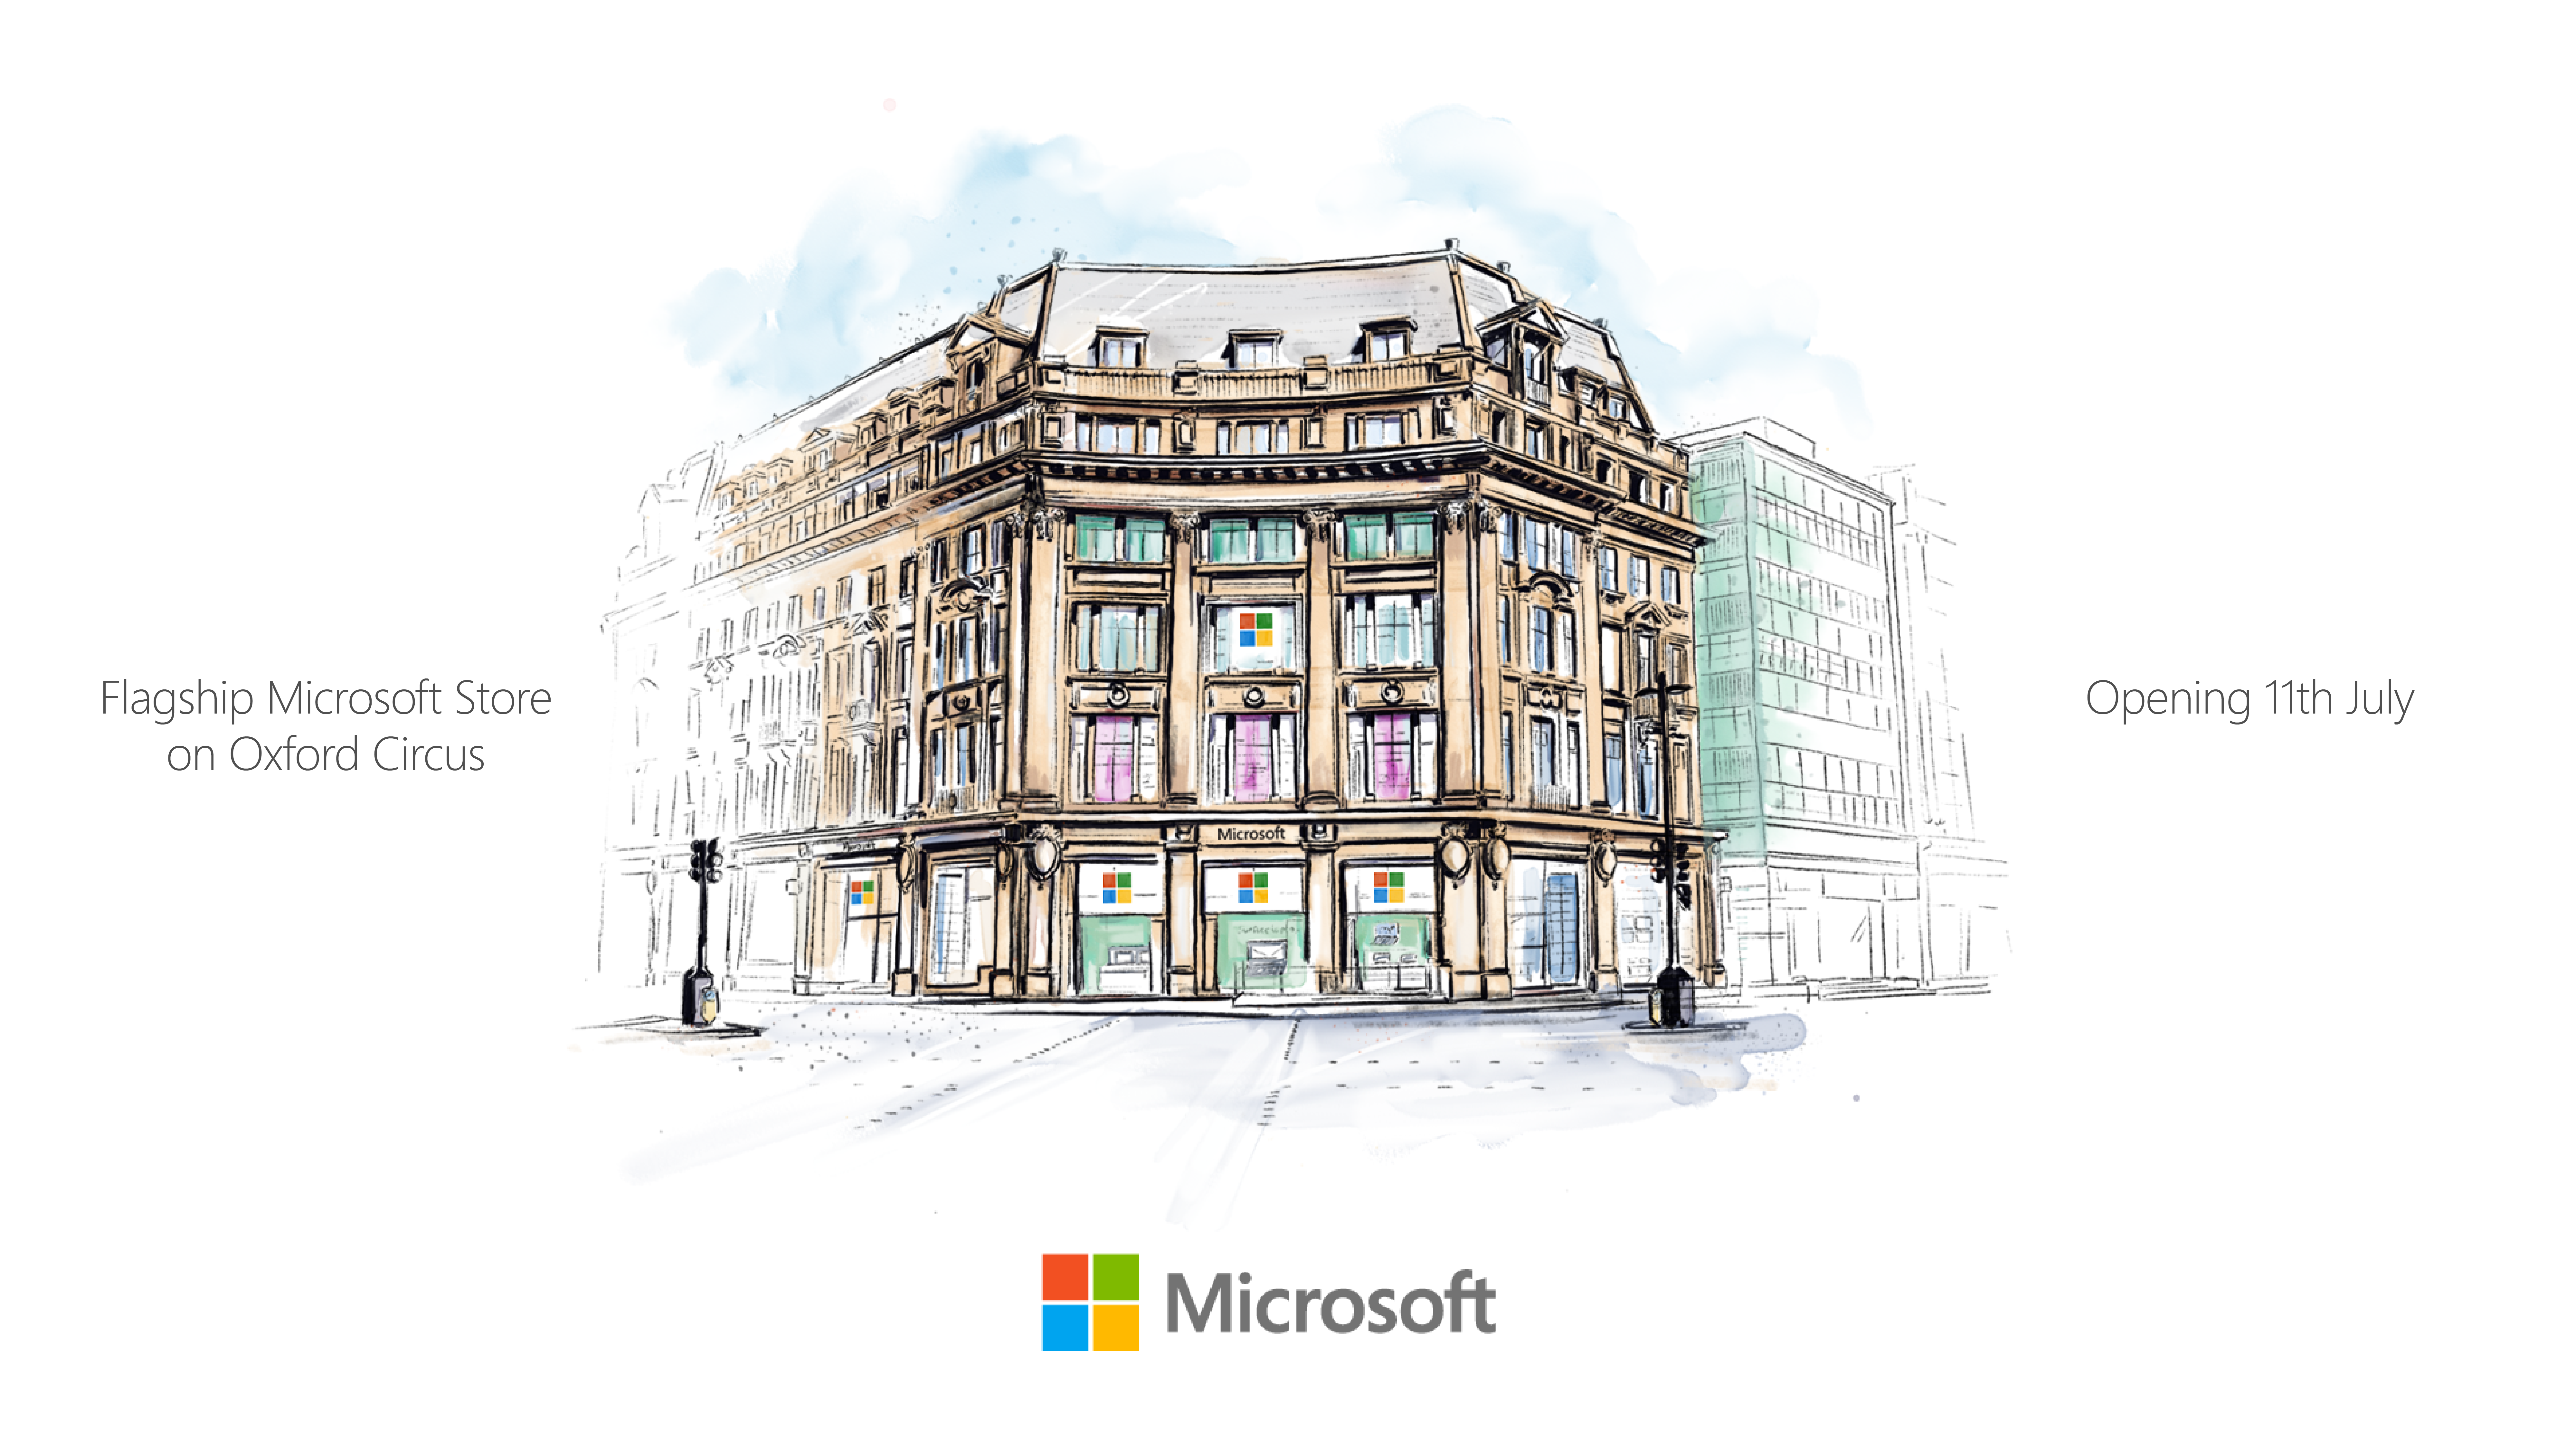 Microsoft's flagship London Store to open on July 11 - OnMSFT.com - May 30, 2019